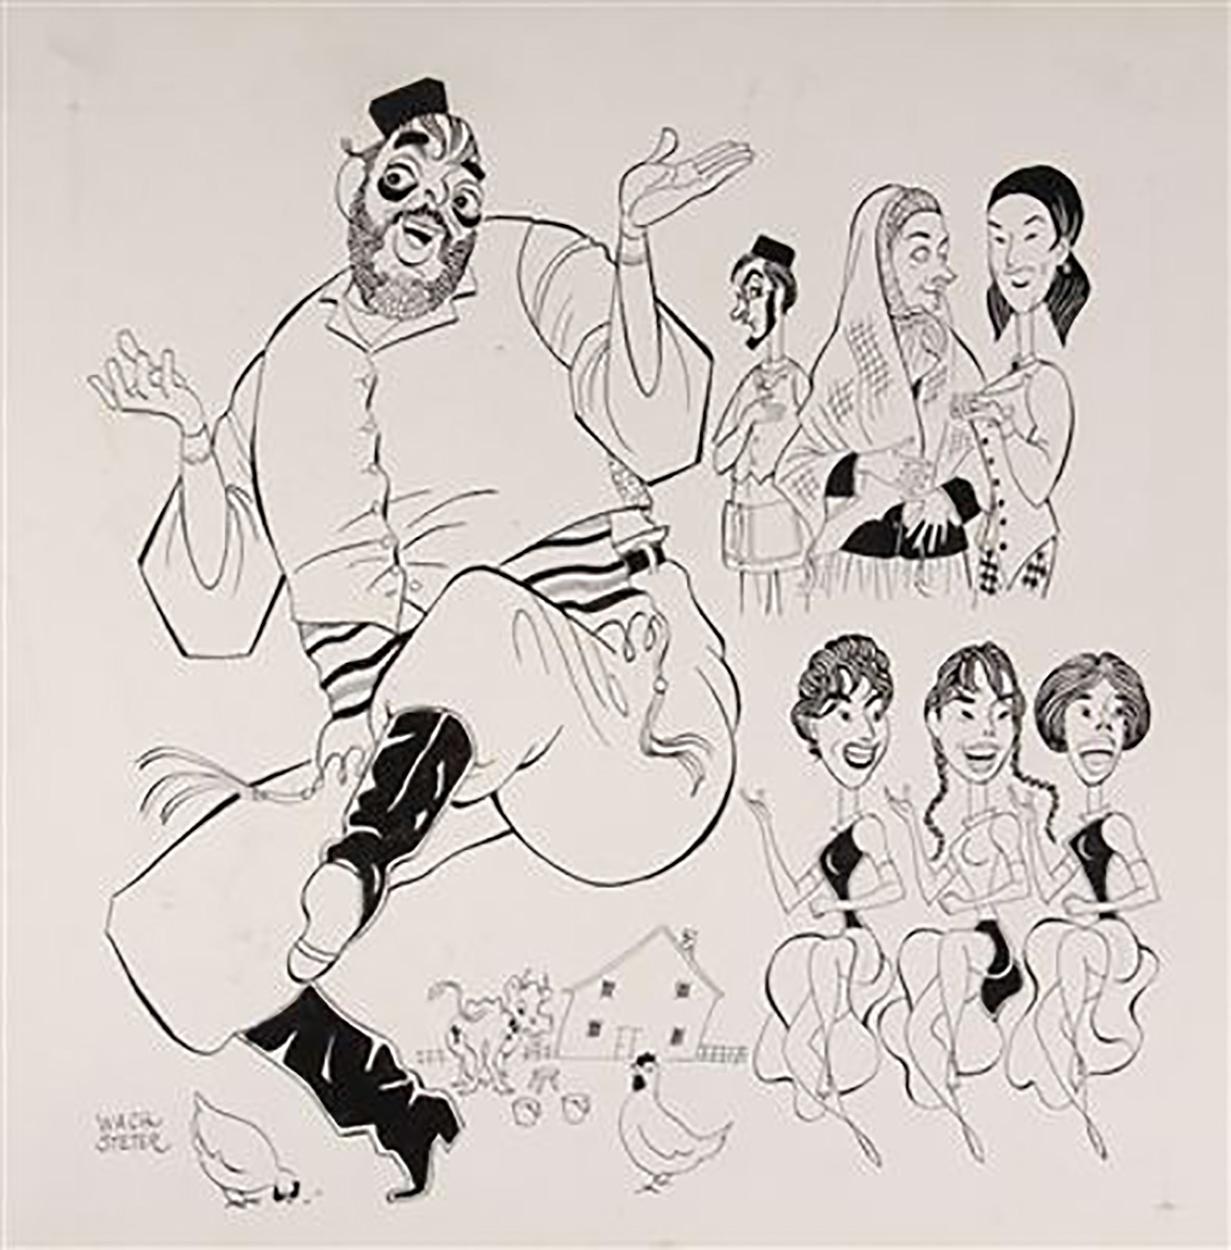 George Wachsteter Figurative Art - Caricature of Opening of Zero Mostel in "Fiddler on the Roof"